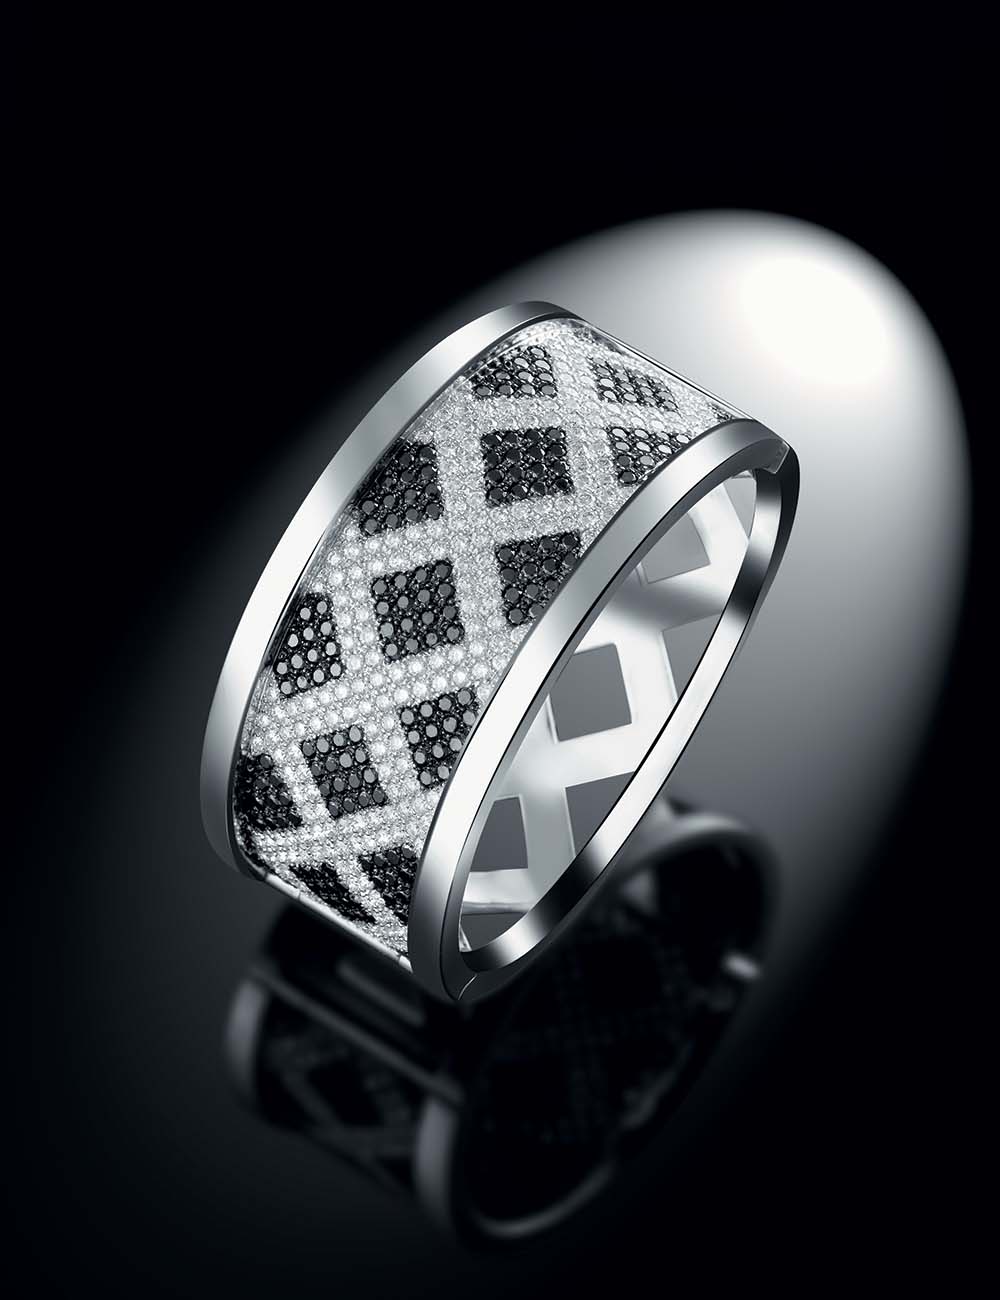 D.Bachet masterpiece: Couture Cuff in gold and diamonds, quintessence of high jewelry.